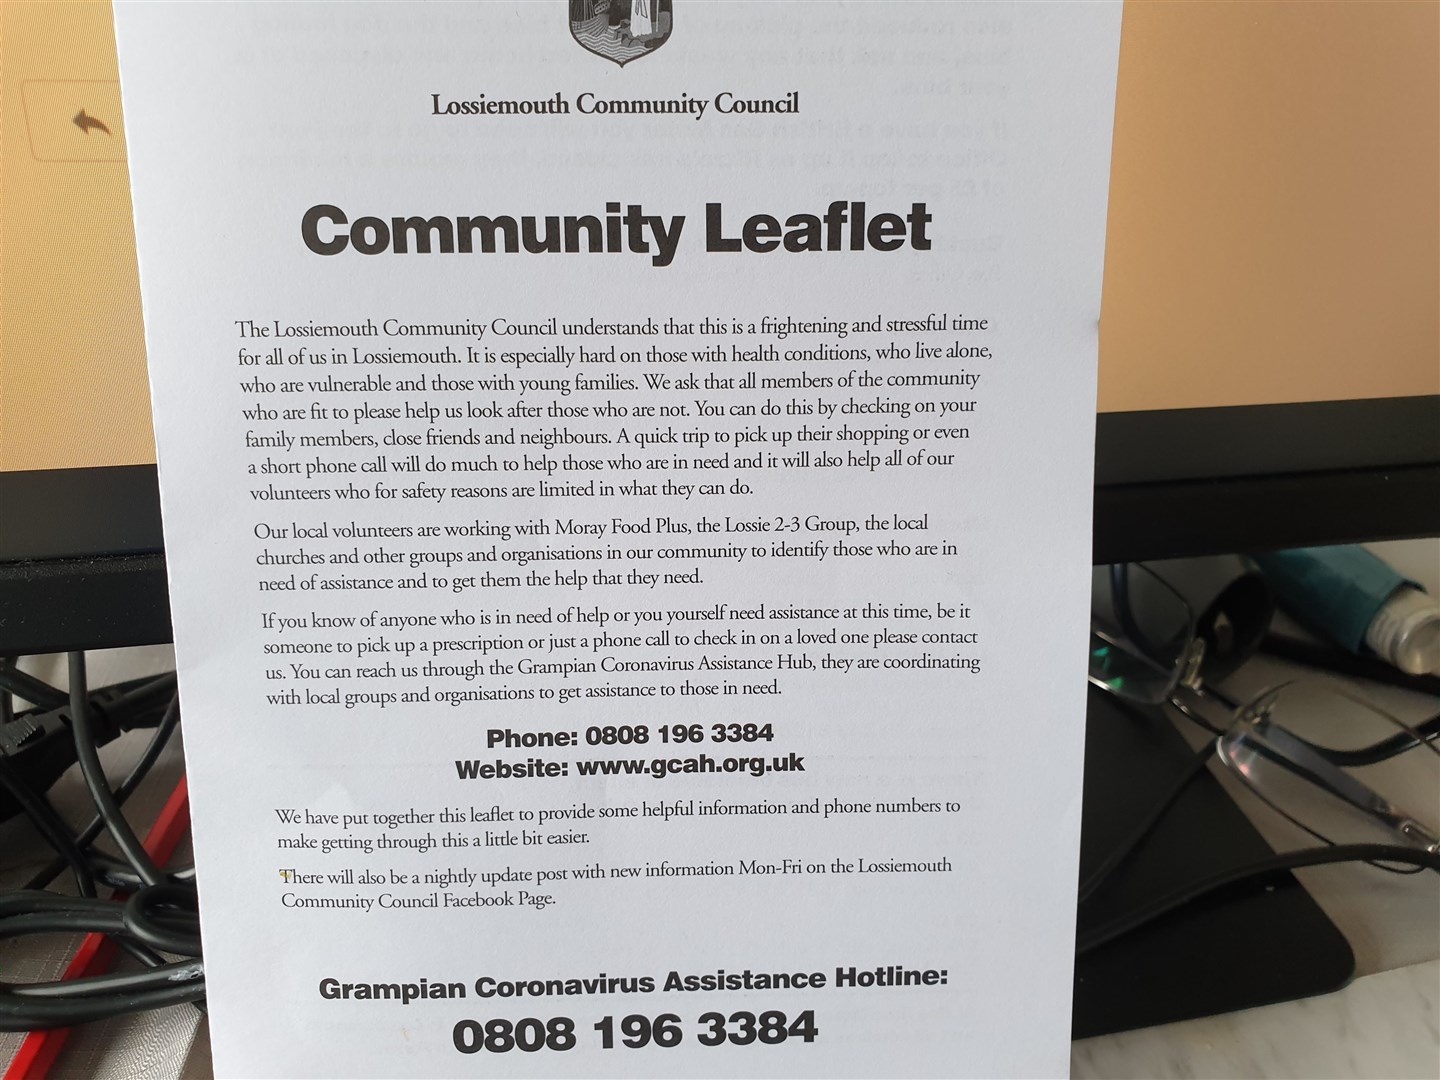 Volunteers are distributing the leaflet across Lossiemouth.